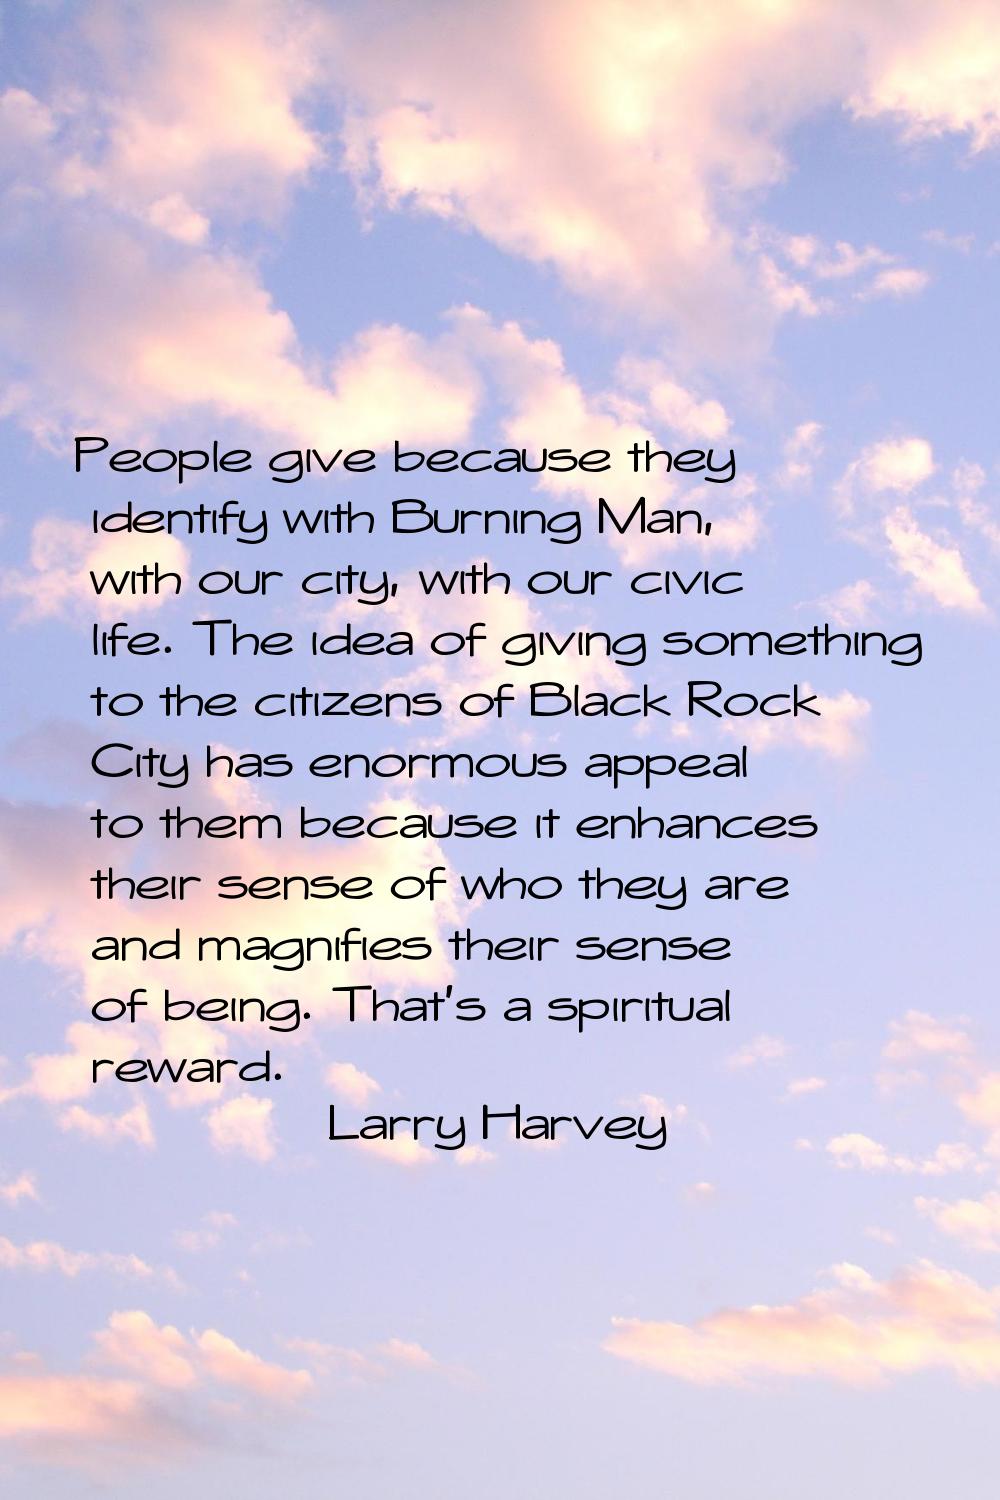 People give because they identify with Burning Man, with our city, with our civic life. The idea of